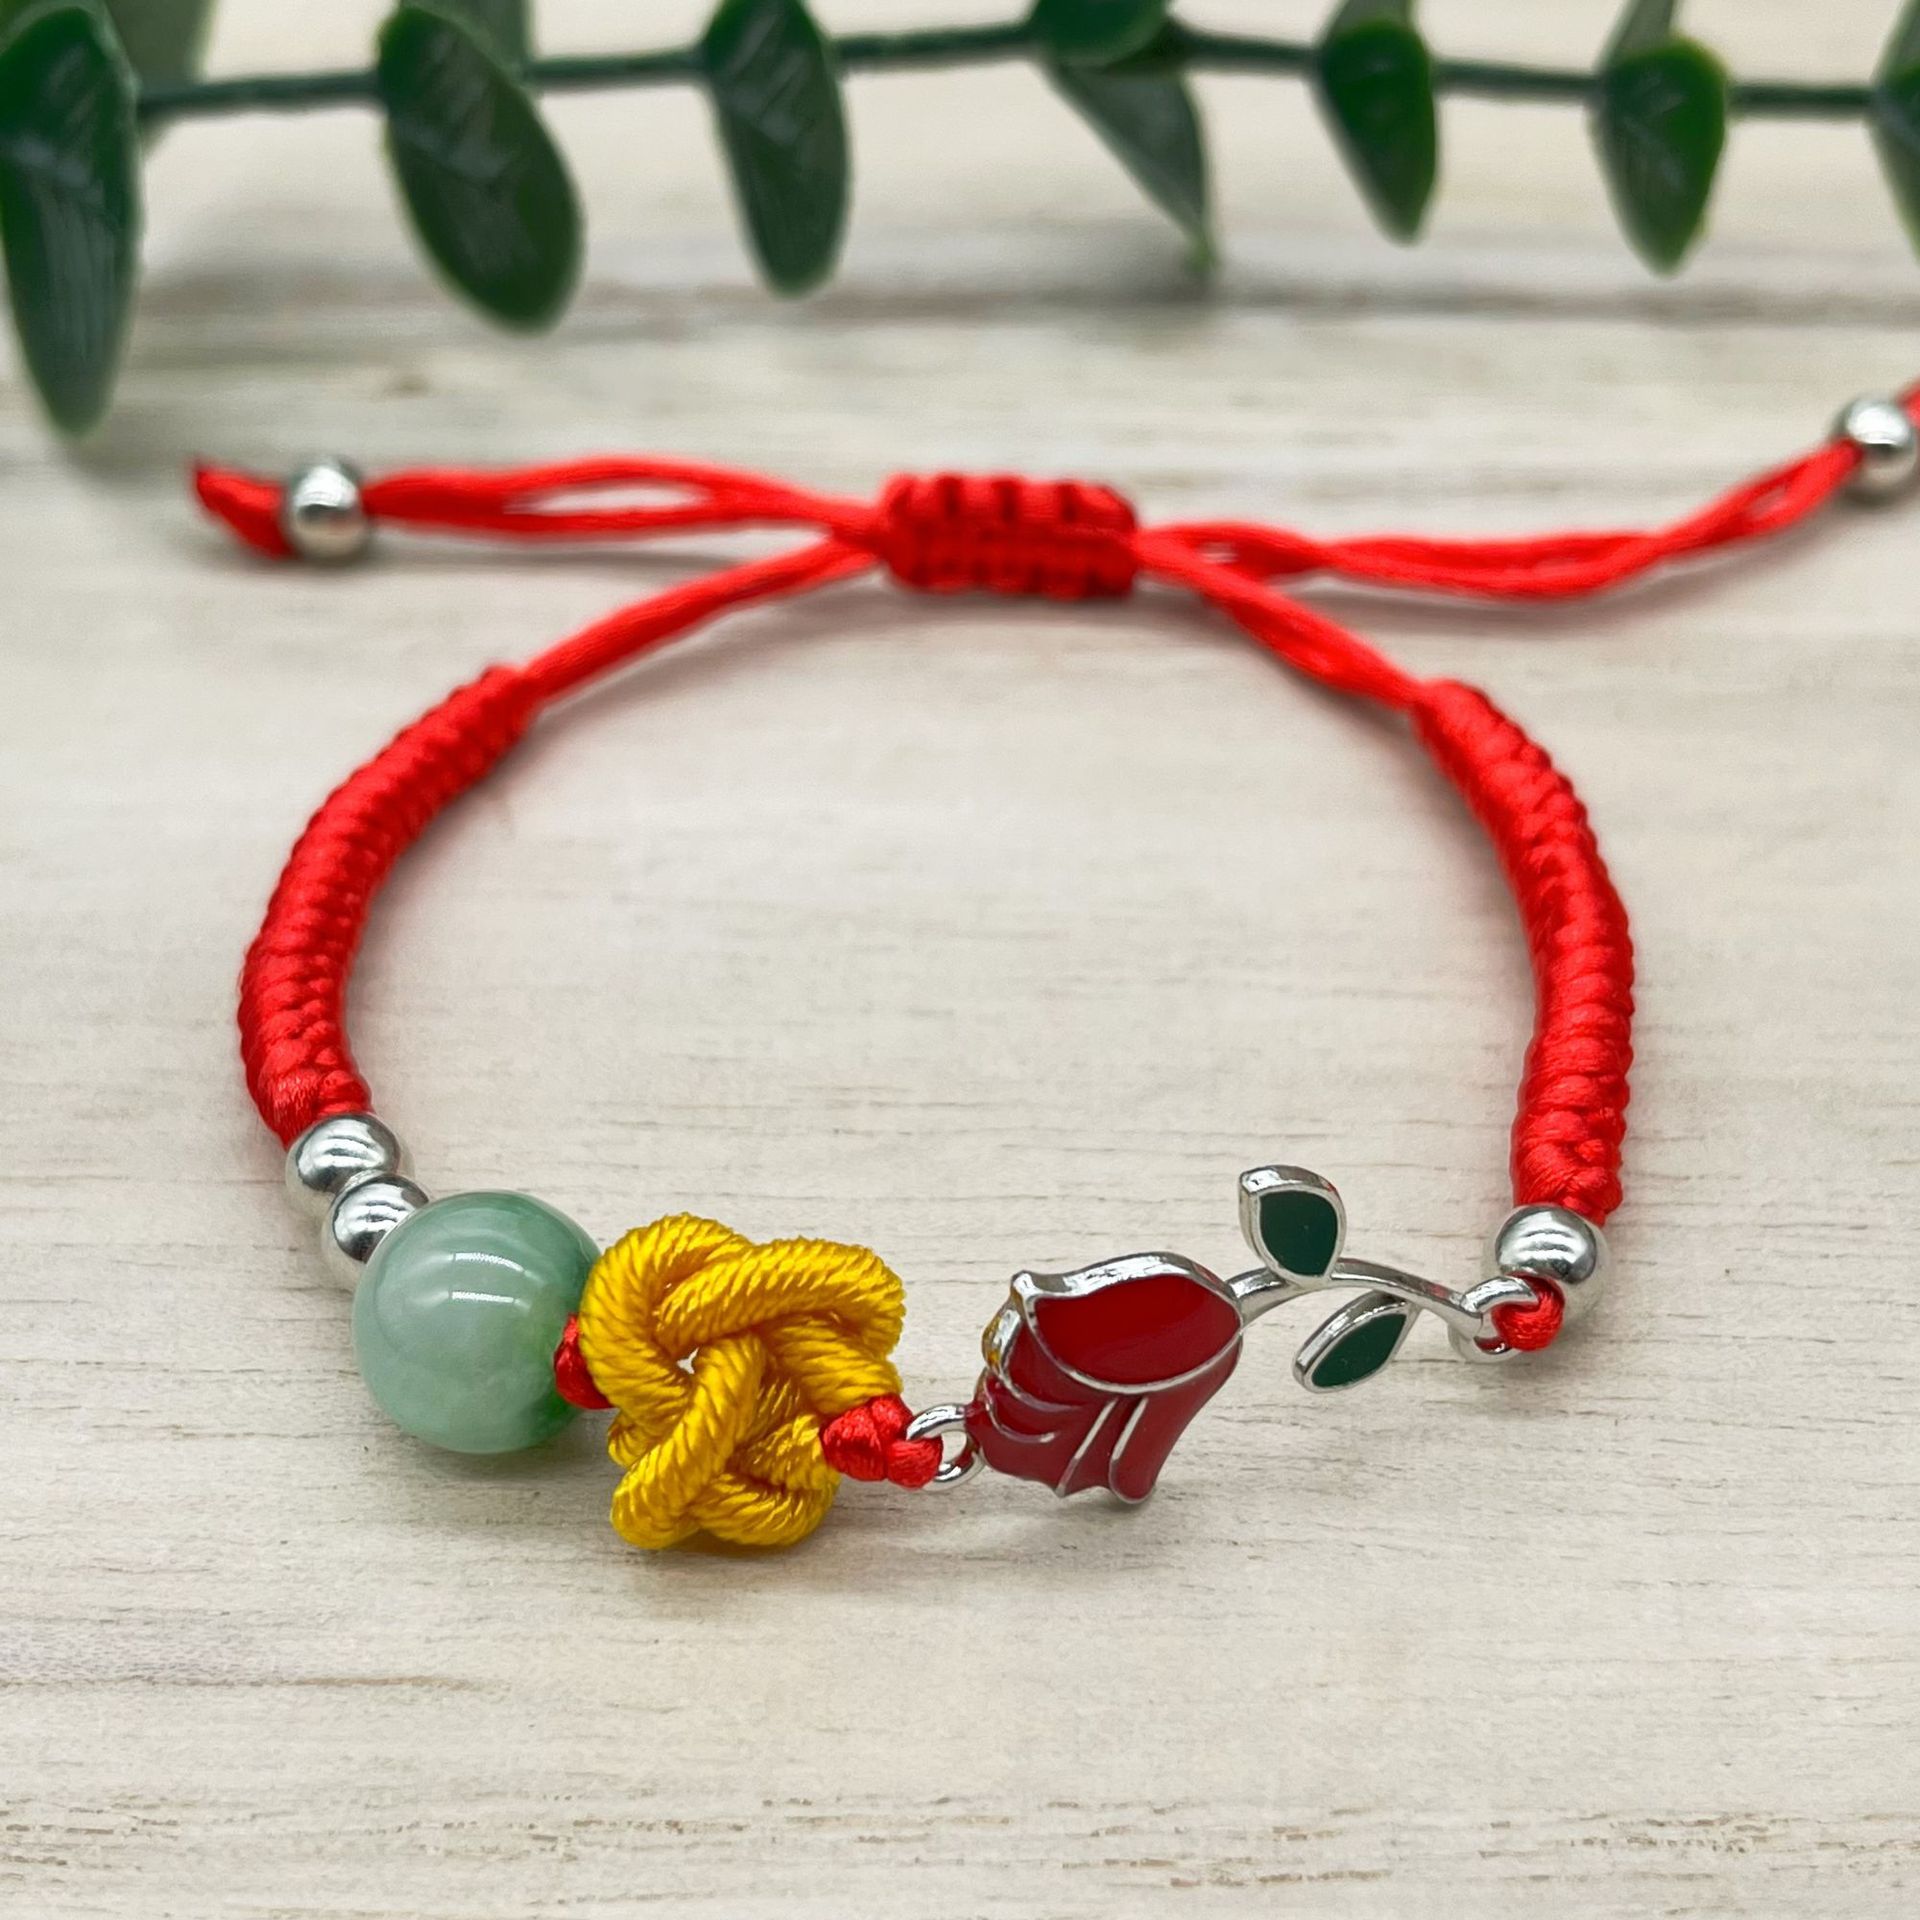 Dragon Boat Festival Ruyi Knot Red Rope Bracelet Men and Women's Natal Year Handmade Woven Jin Gang Knot Lucky Red Carrying Strap Wholesale